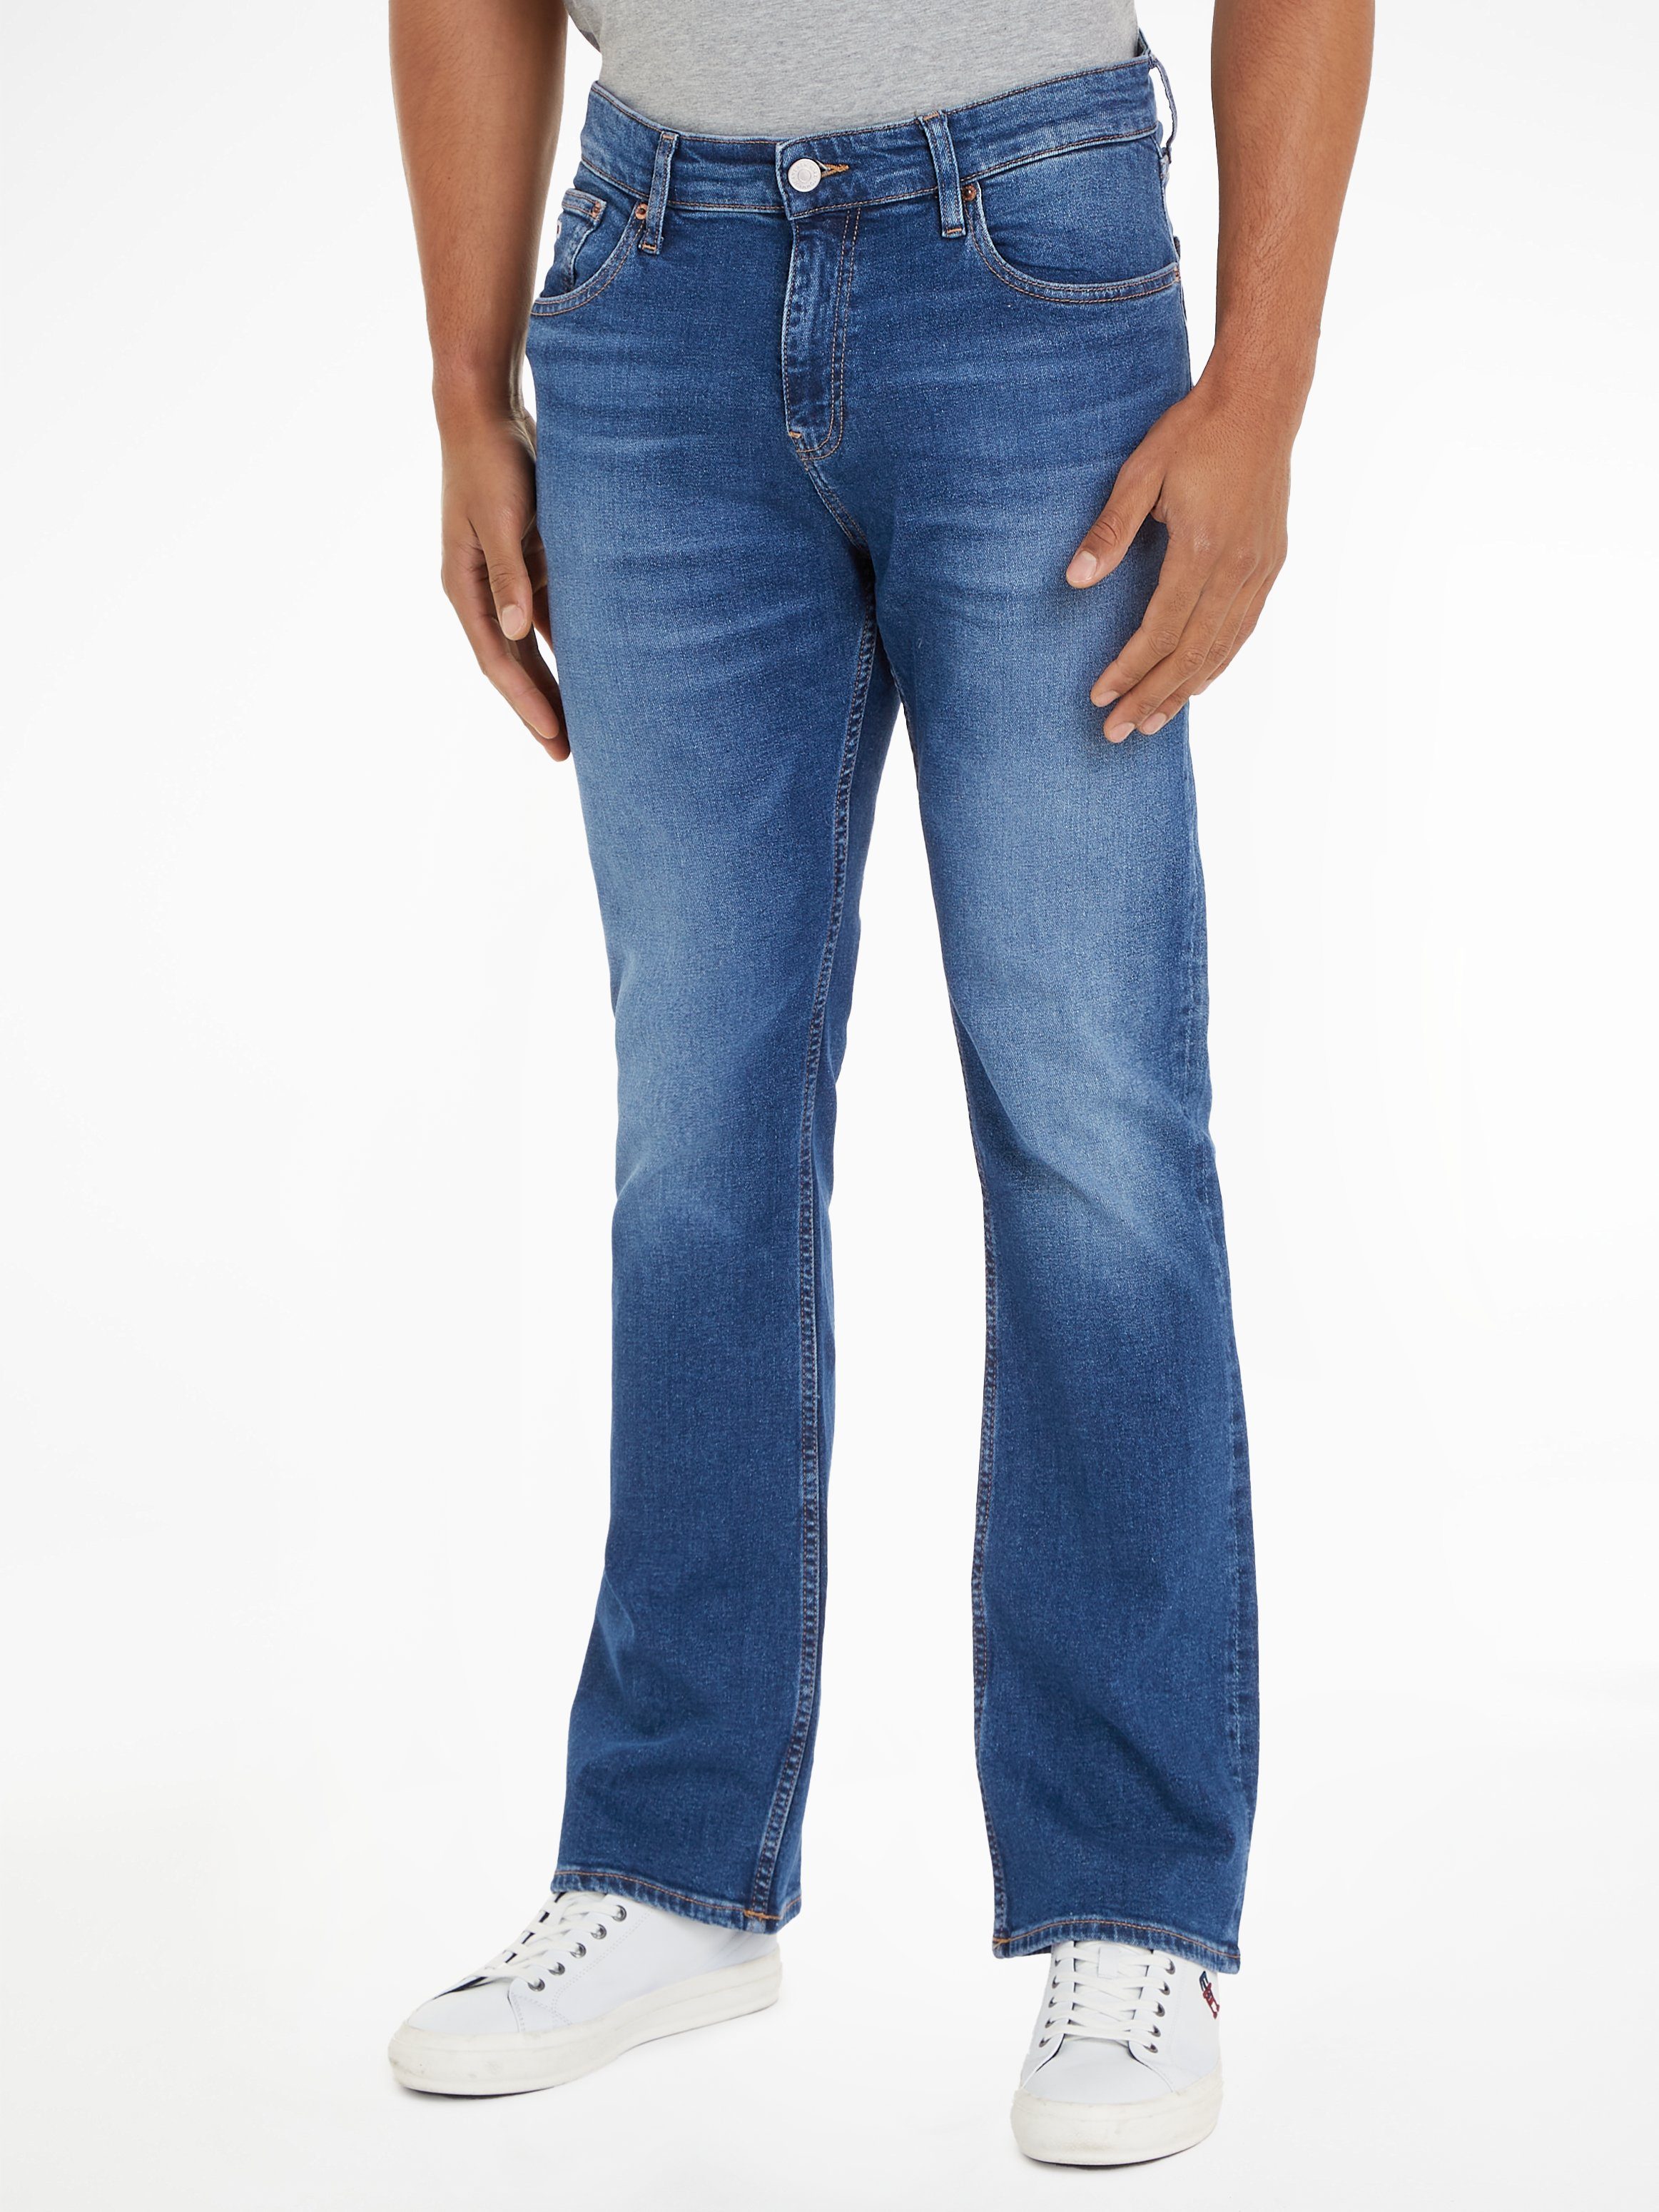 Tommy Jeans Bootcut-Jeans RYAN BOOTCUT AH5168 im 5-Pocket-Style